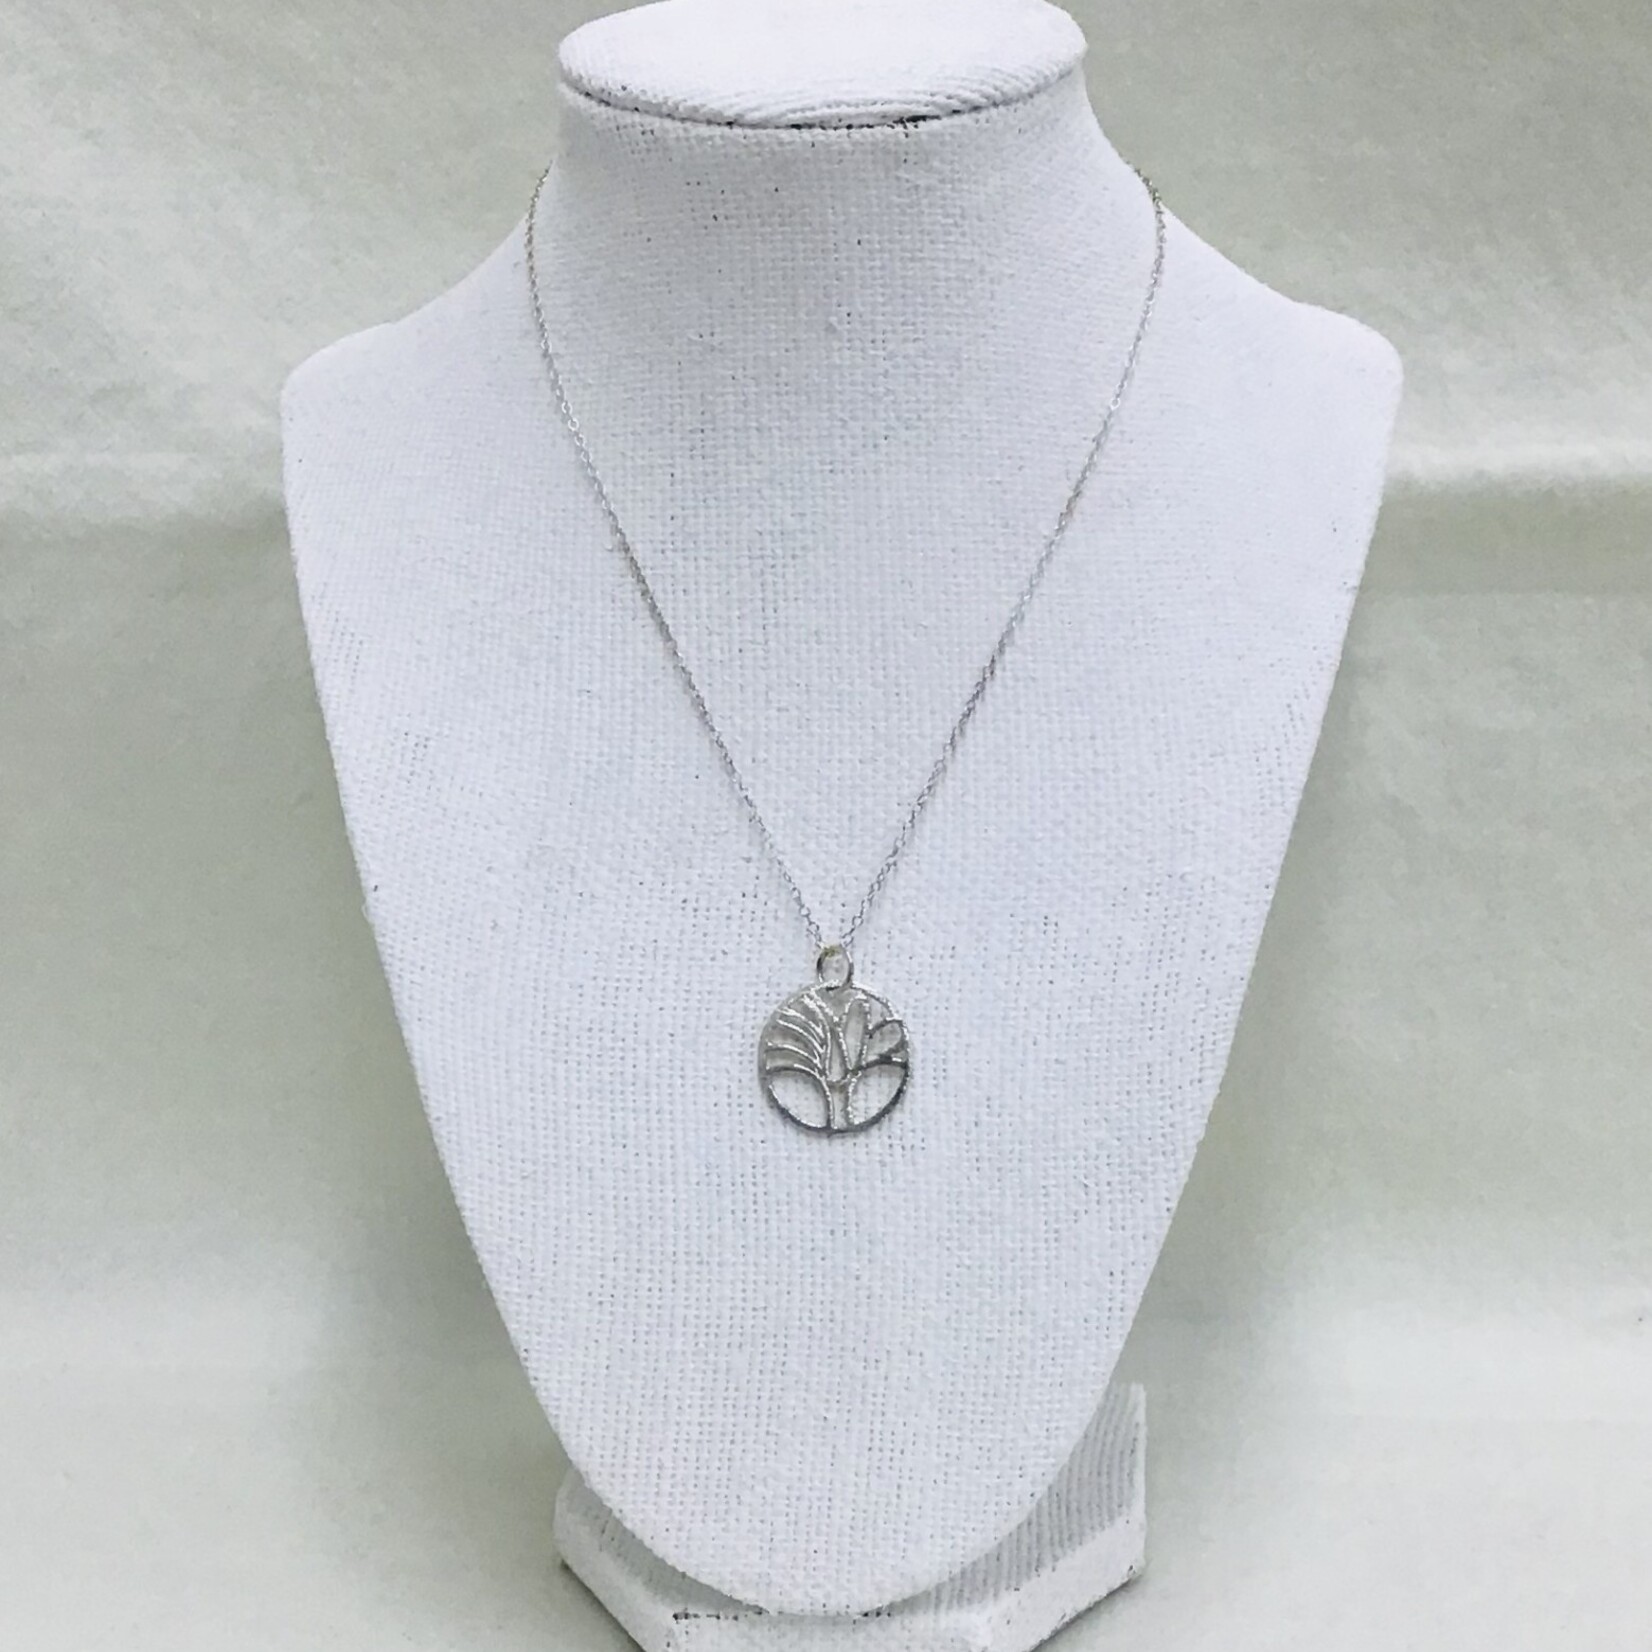 Ten Thousand Villages Giving Tree Necklace